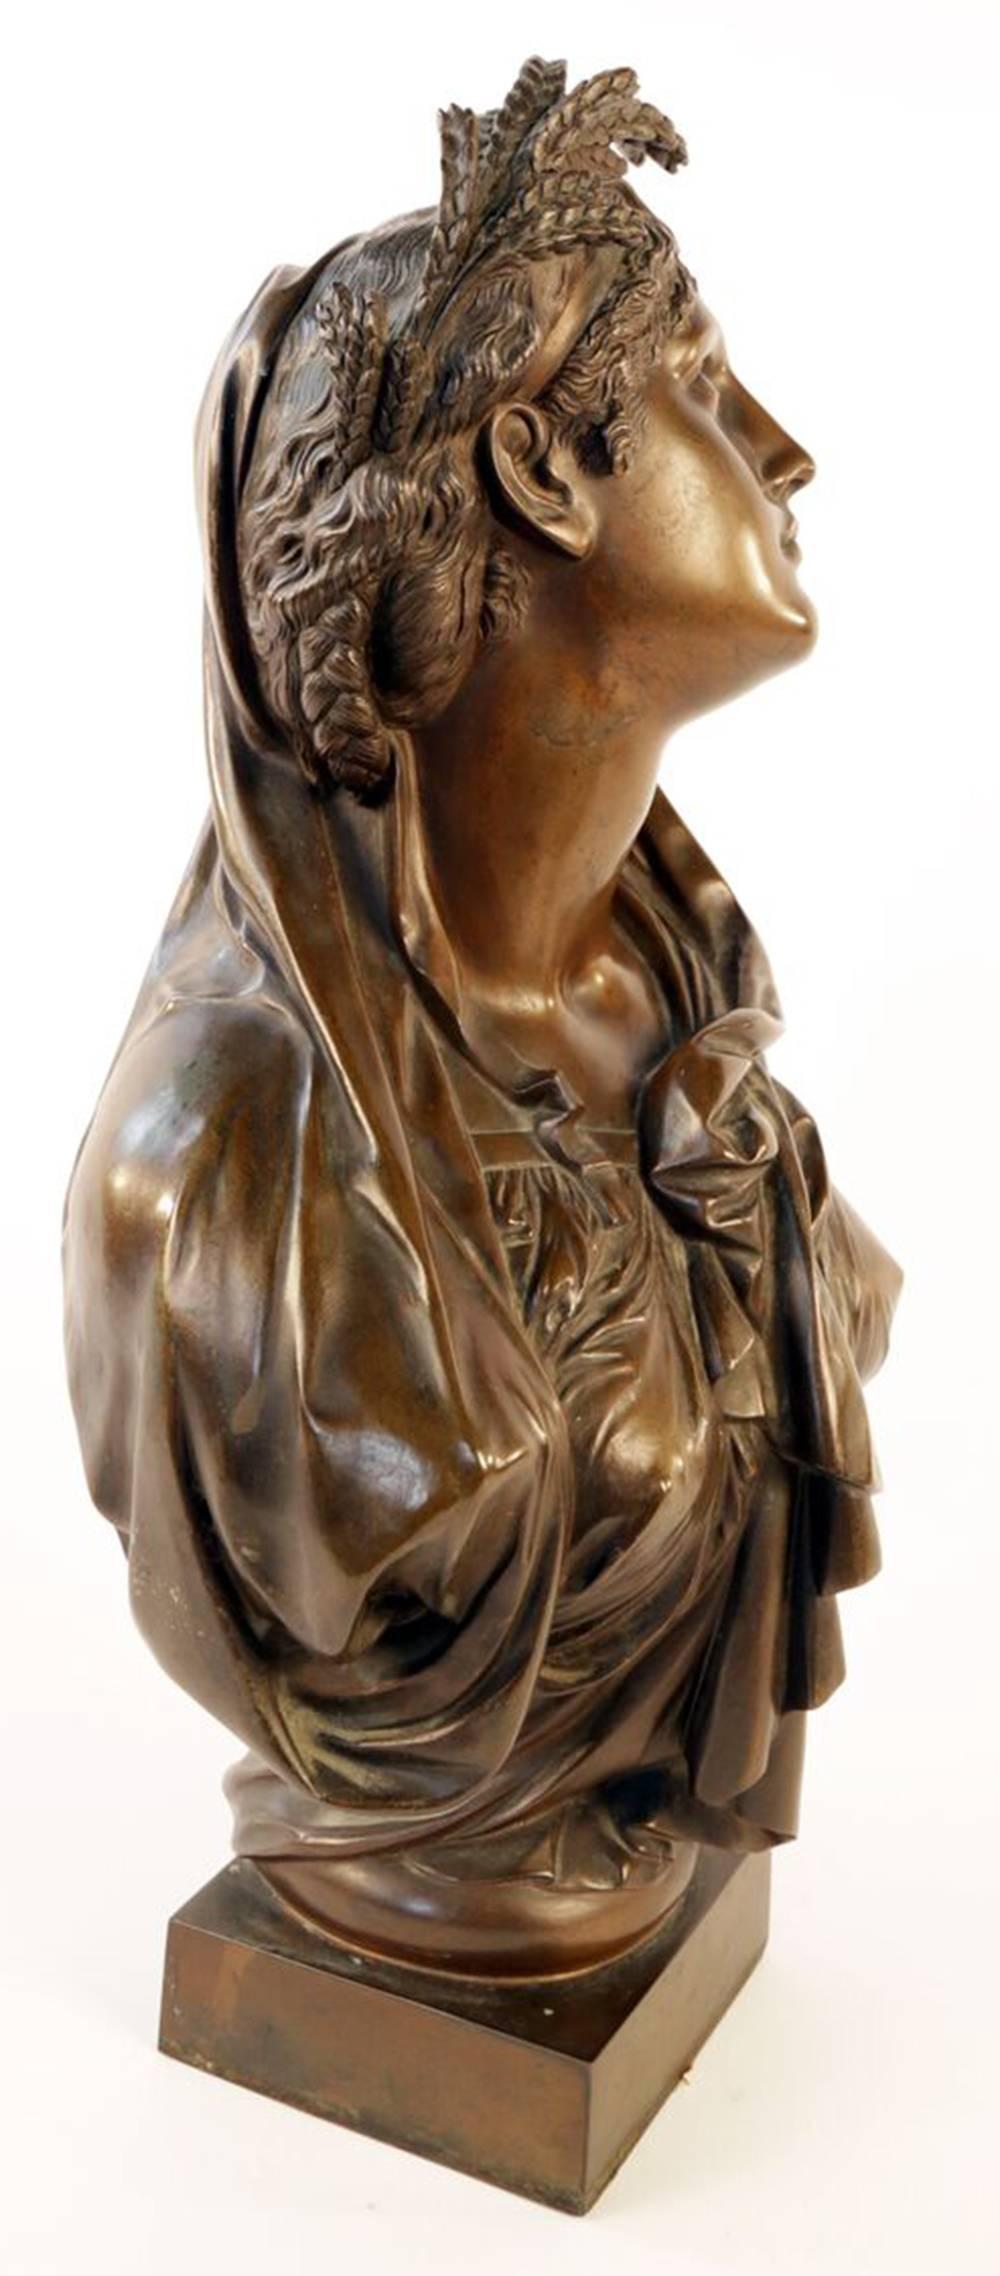 Bronze Bust of Ceres - Gold Figurative Sculpture by Unknown